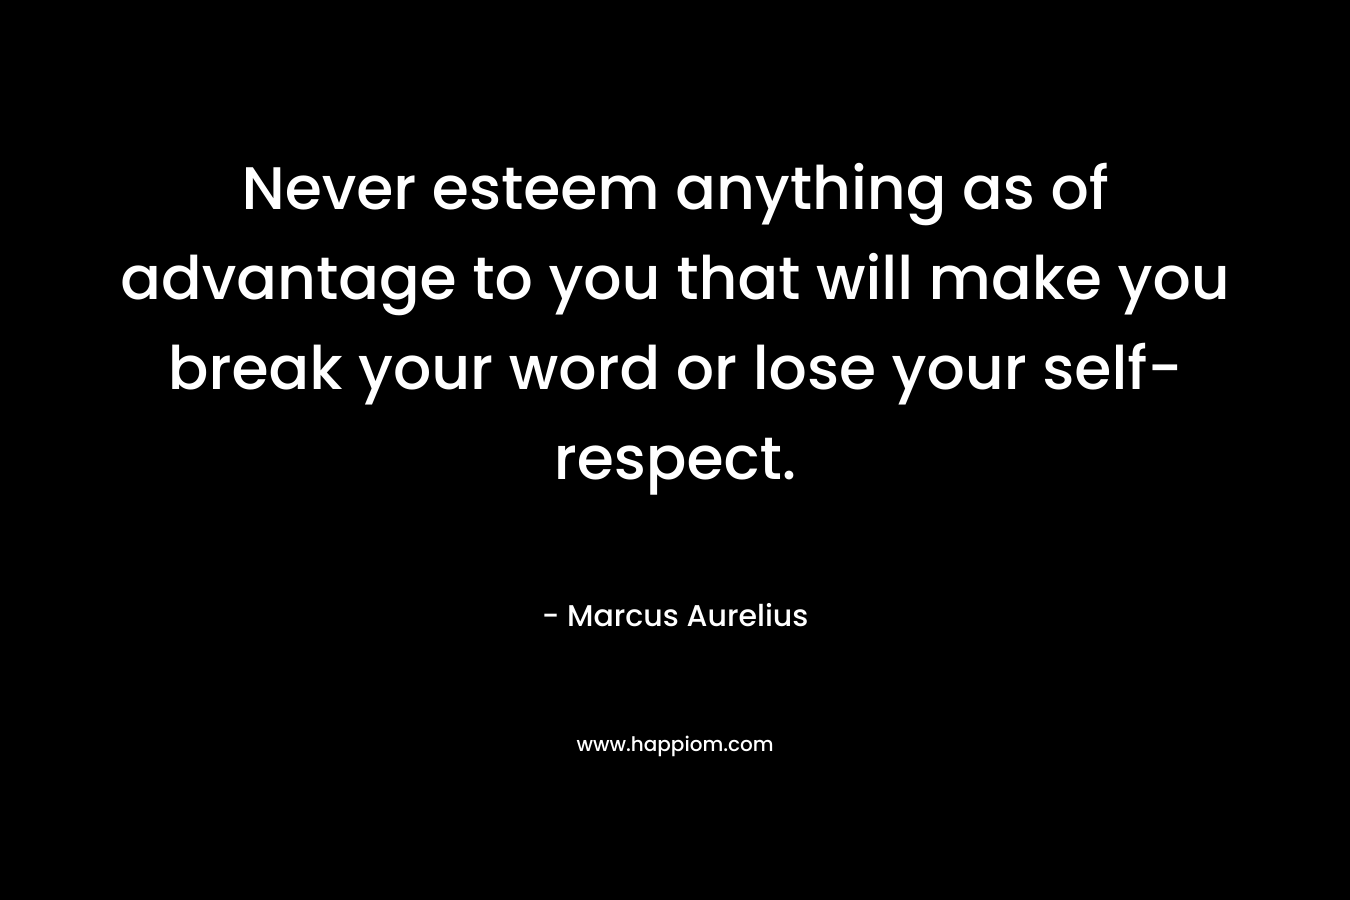 Never esteem anything as of advantage to you that will make you break your word or lose your self-respect.